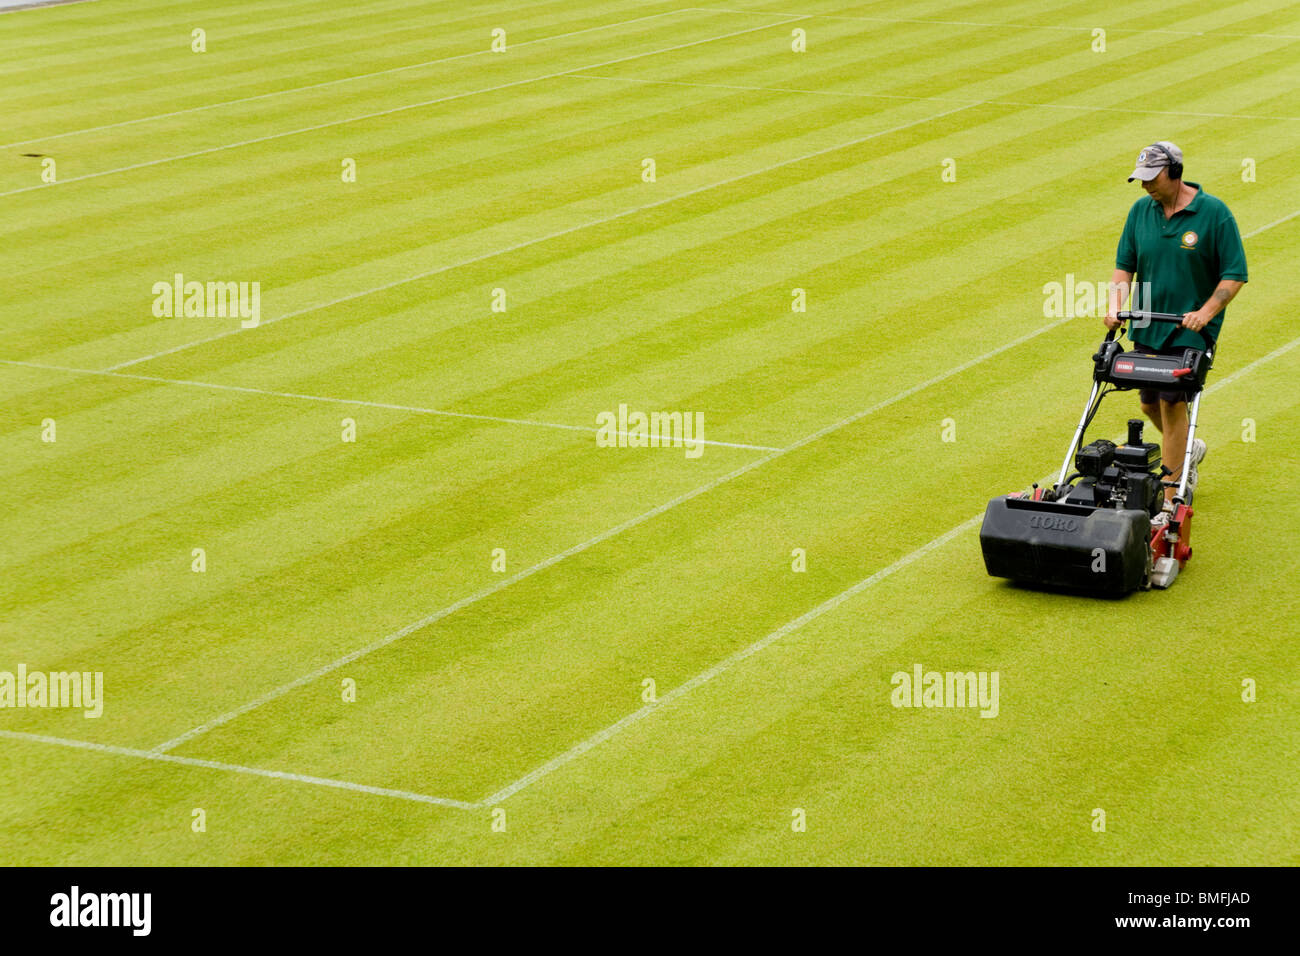 Groundsman at All England Tennis Club, Wimbledon SW19, mowing the Centre Court tennis court lawn . UK. Stock Photo